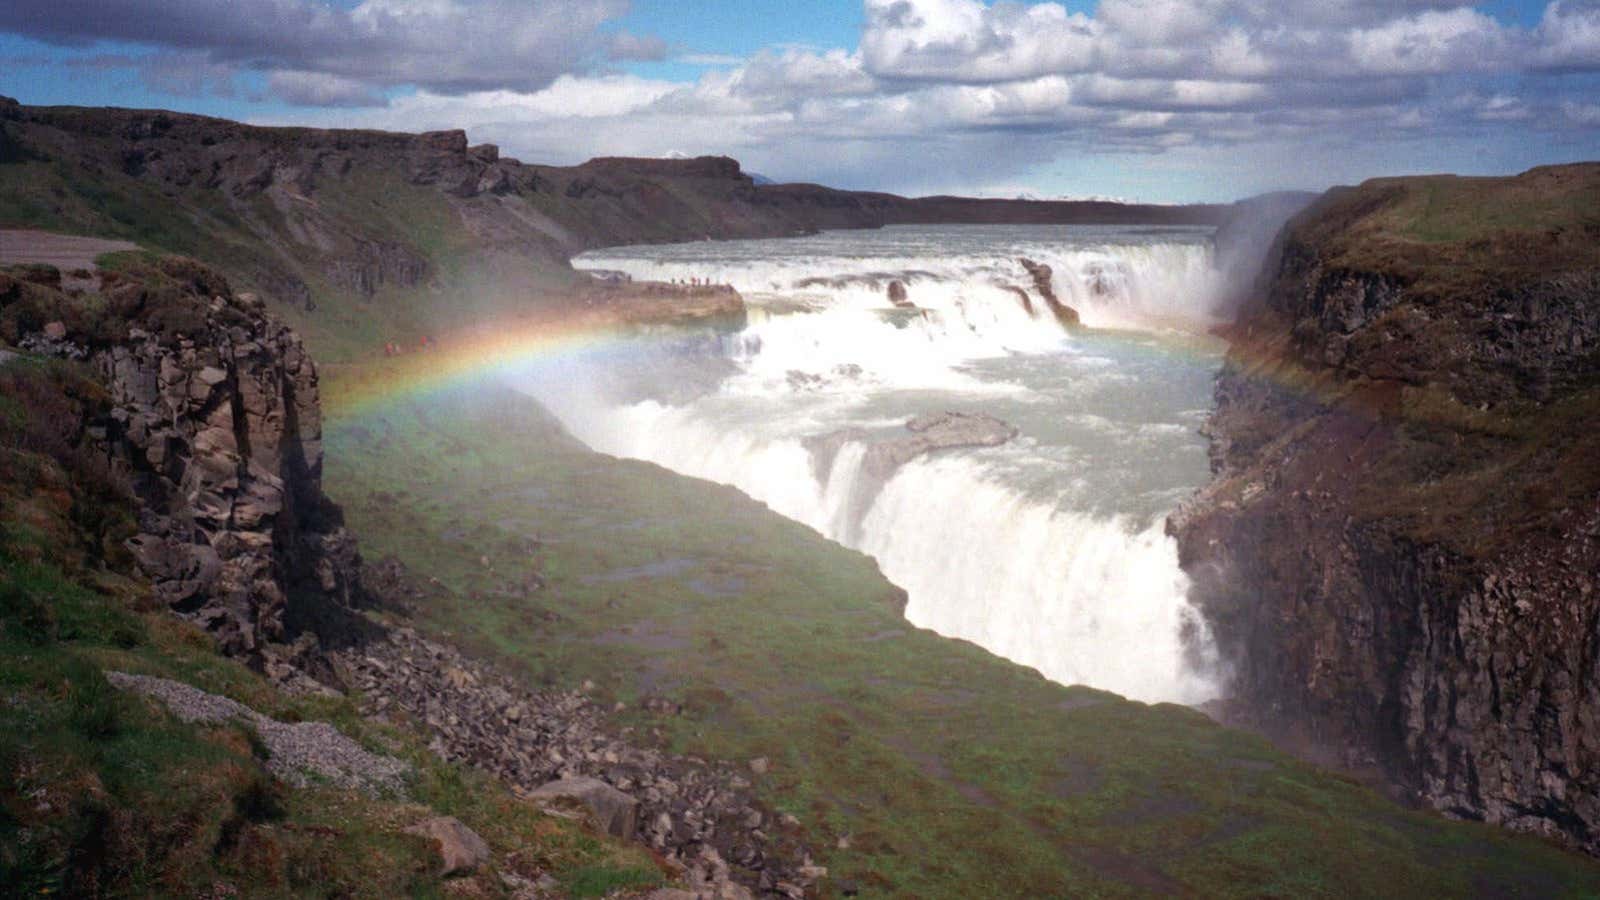 Droves of visitors descend upon Iceland’s Gullfoss waterfall during peak tourist season.